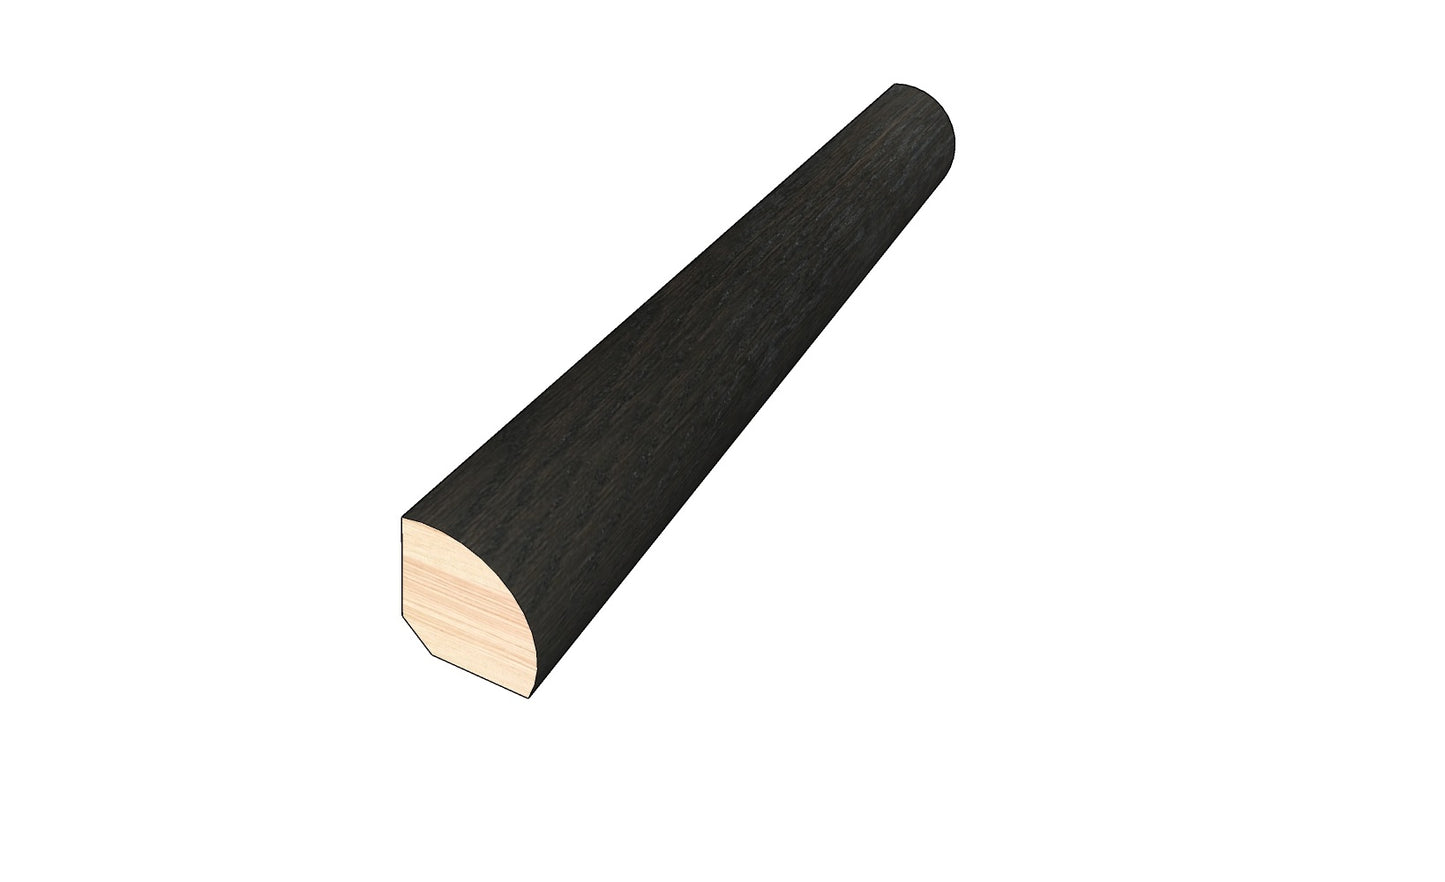 Pioneer 0.75 in. Thick x 0.75 in. Width x 78 in. Length Hardwood Quarter Round Molding